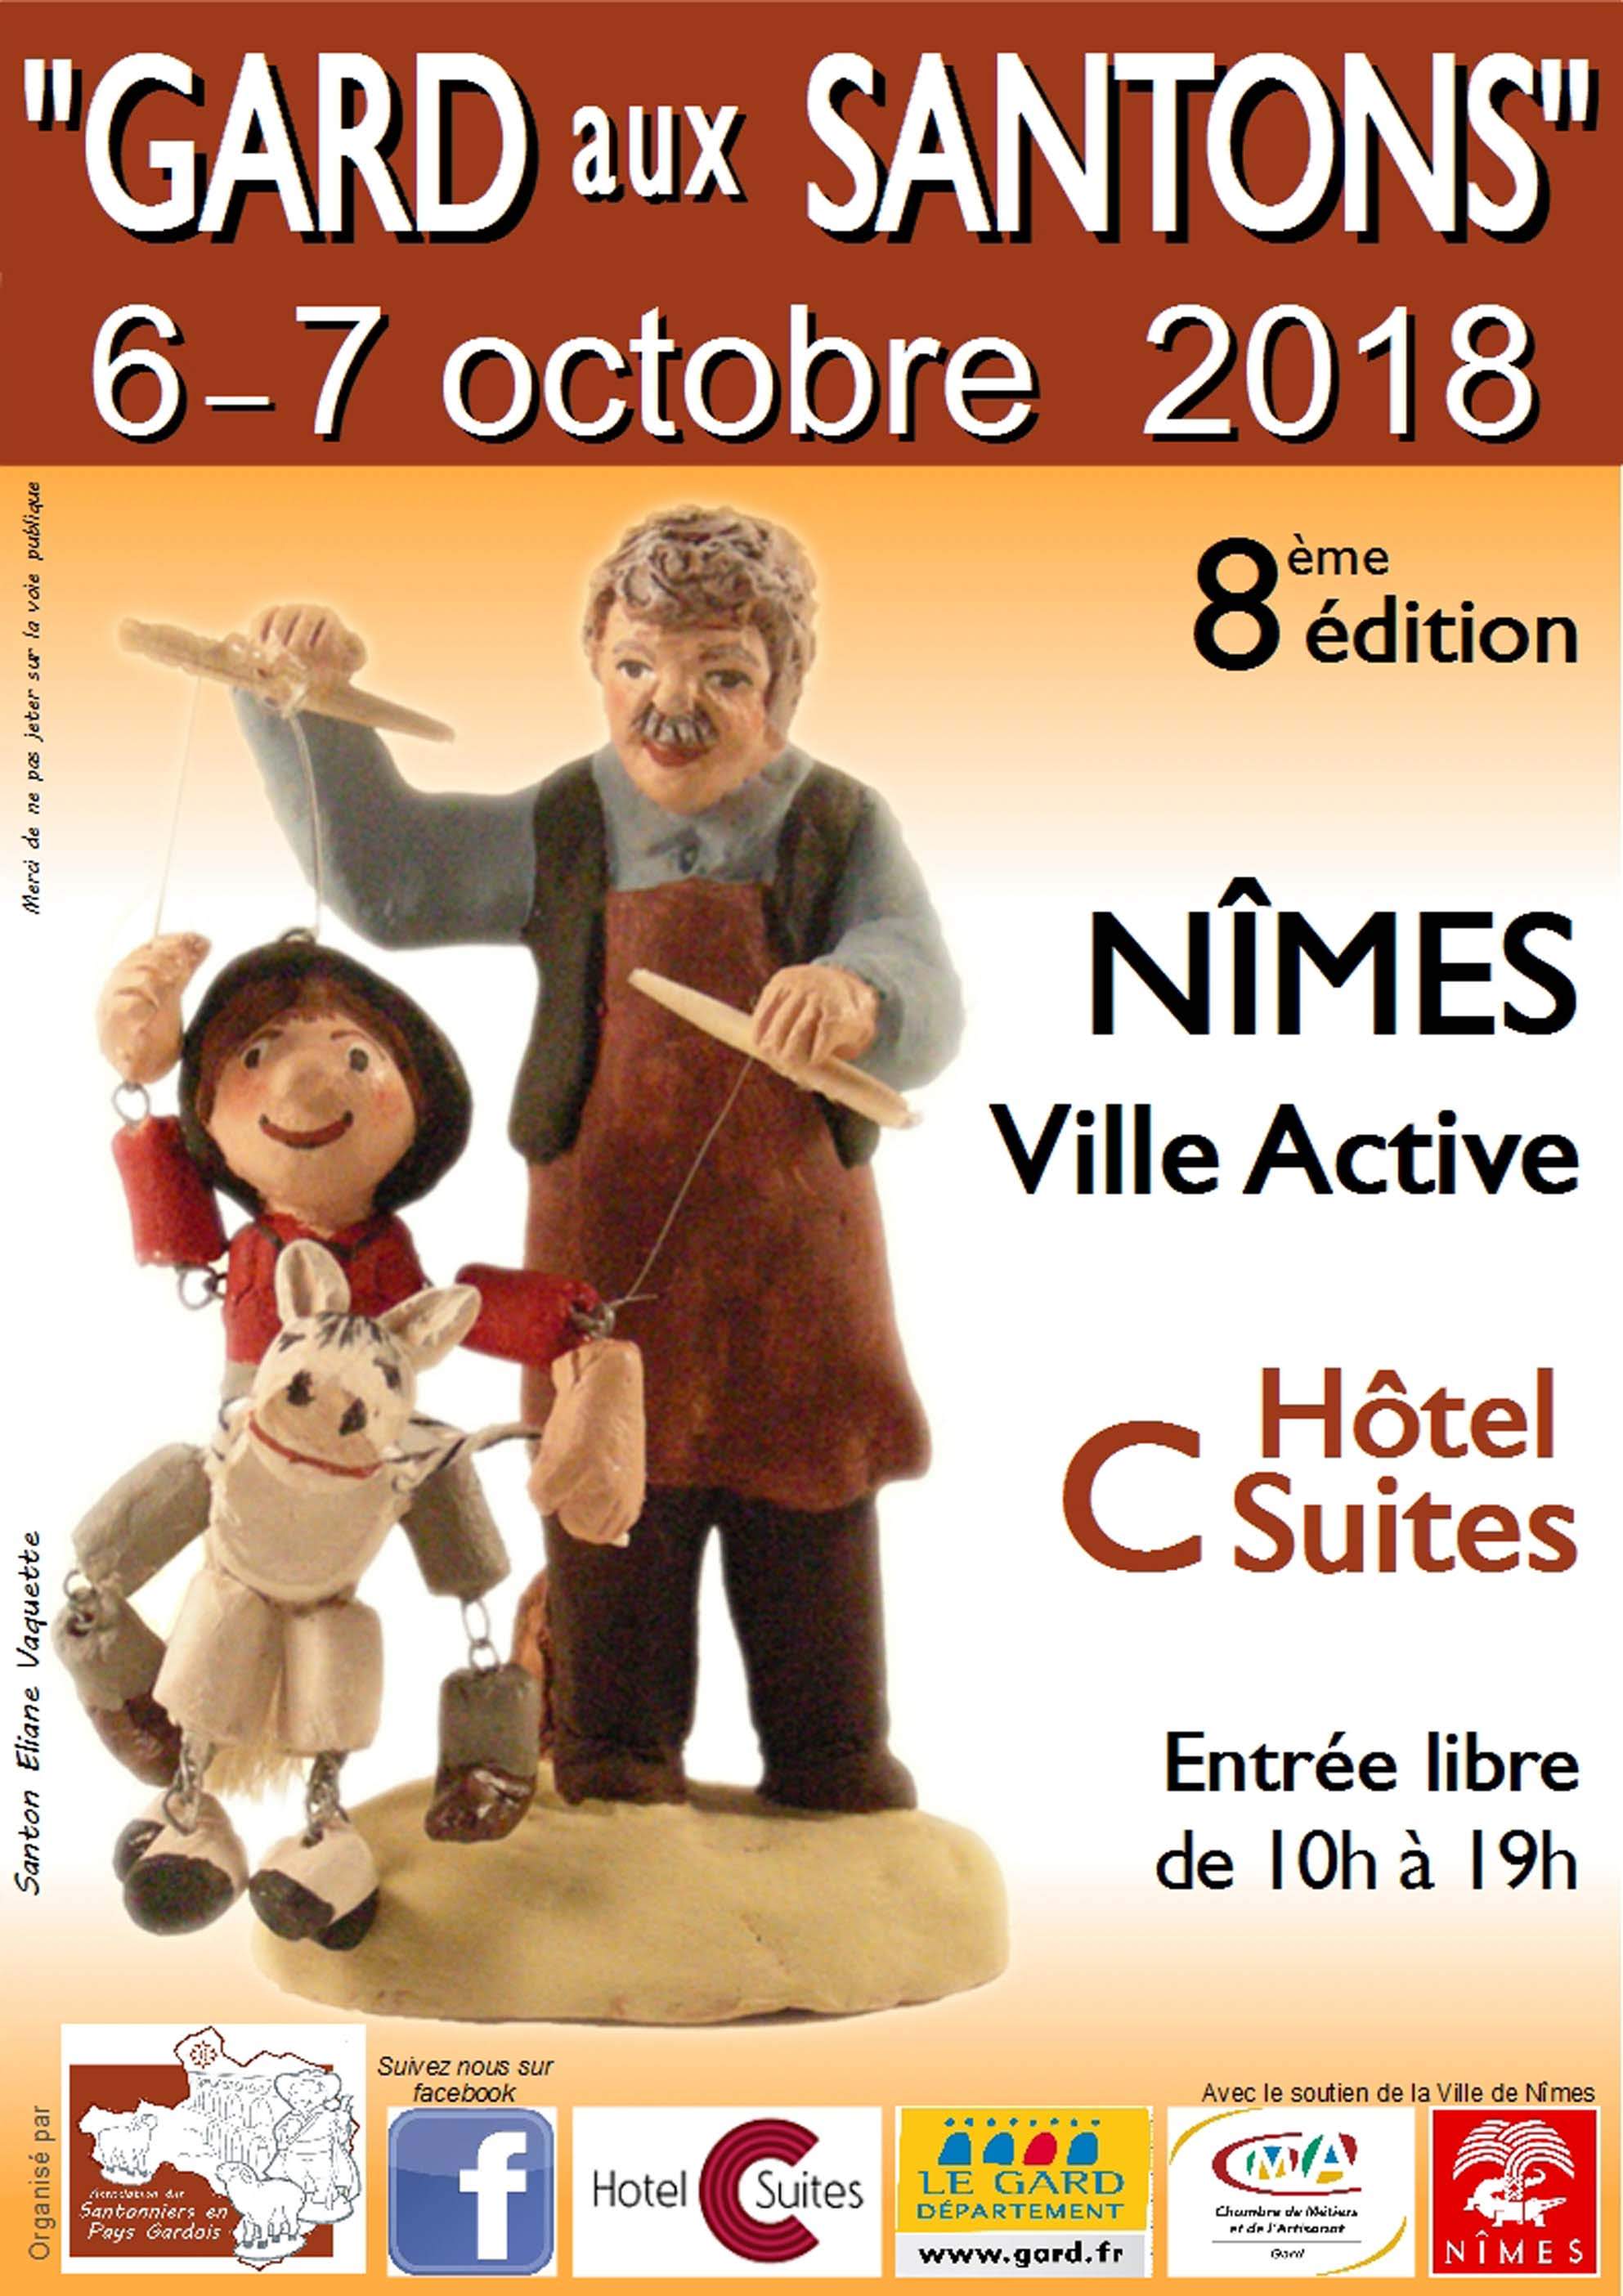 You are currently viewing “Gard aux santons” – Nimes – 2018